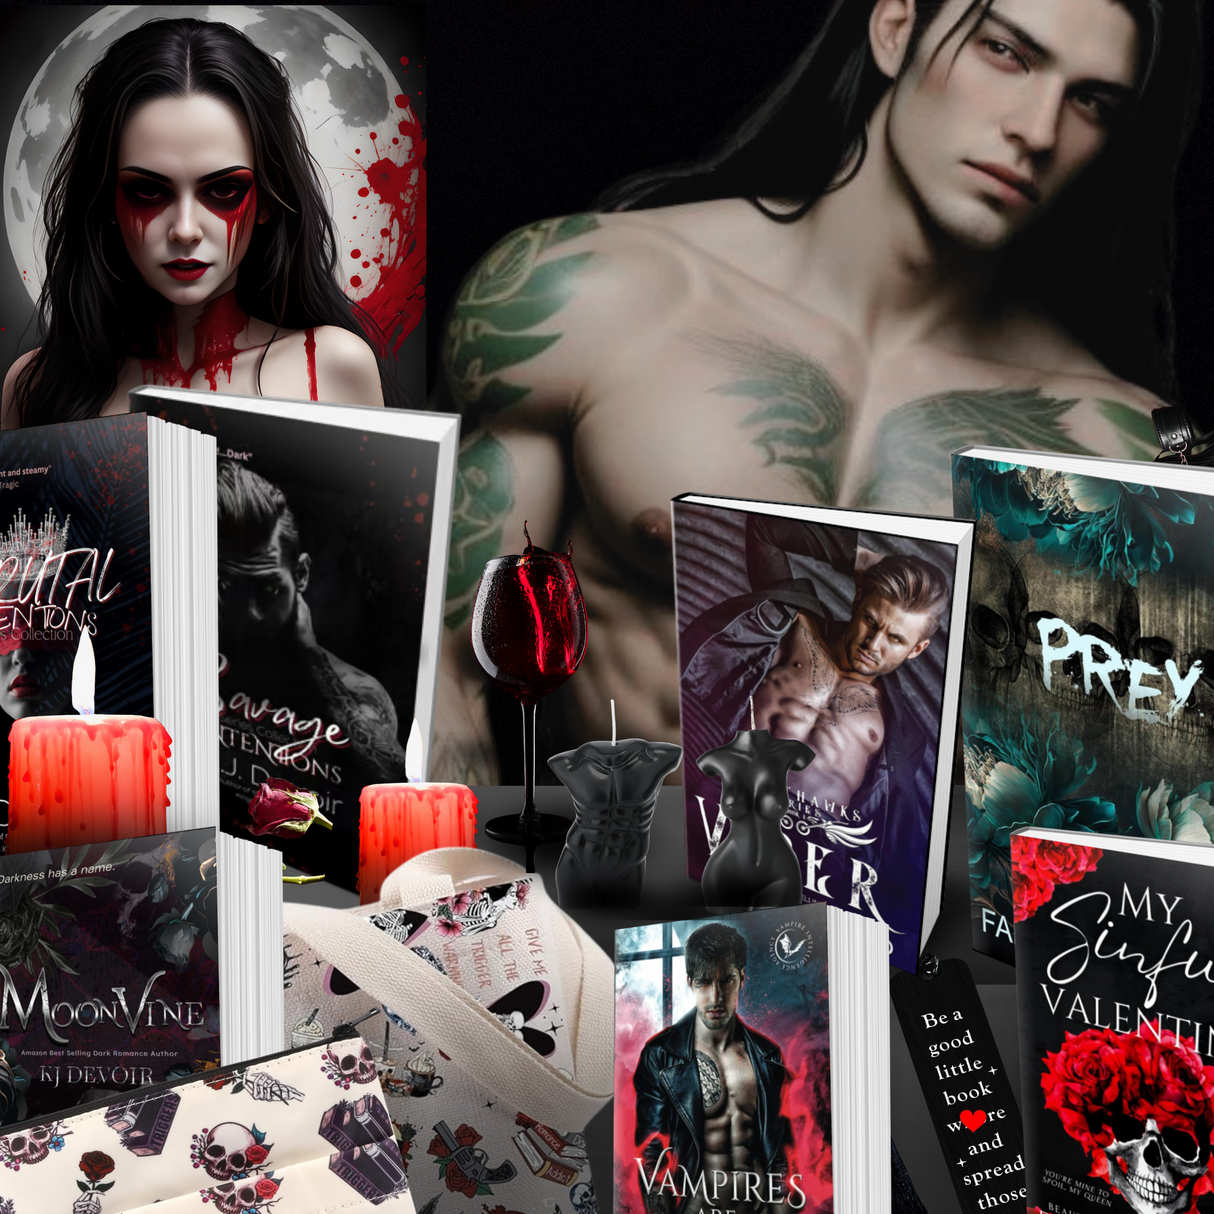 5) NEW Combo Bundle: 3 crates, bigger discount! PNR + Gothic + Erotic Horror Crates 35% off!  Receive at least 1 book per crate + merch in large box. *Select "one time purchase" *Select "one time purchase" at checkout. Not available via Subscription.